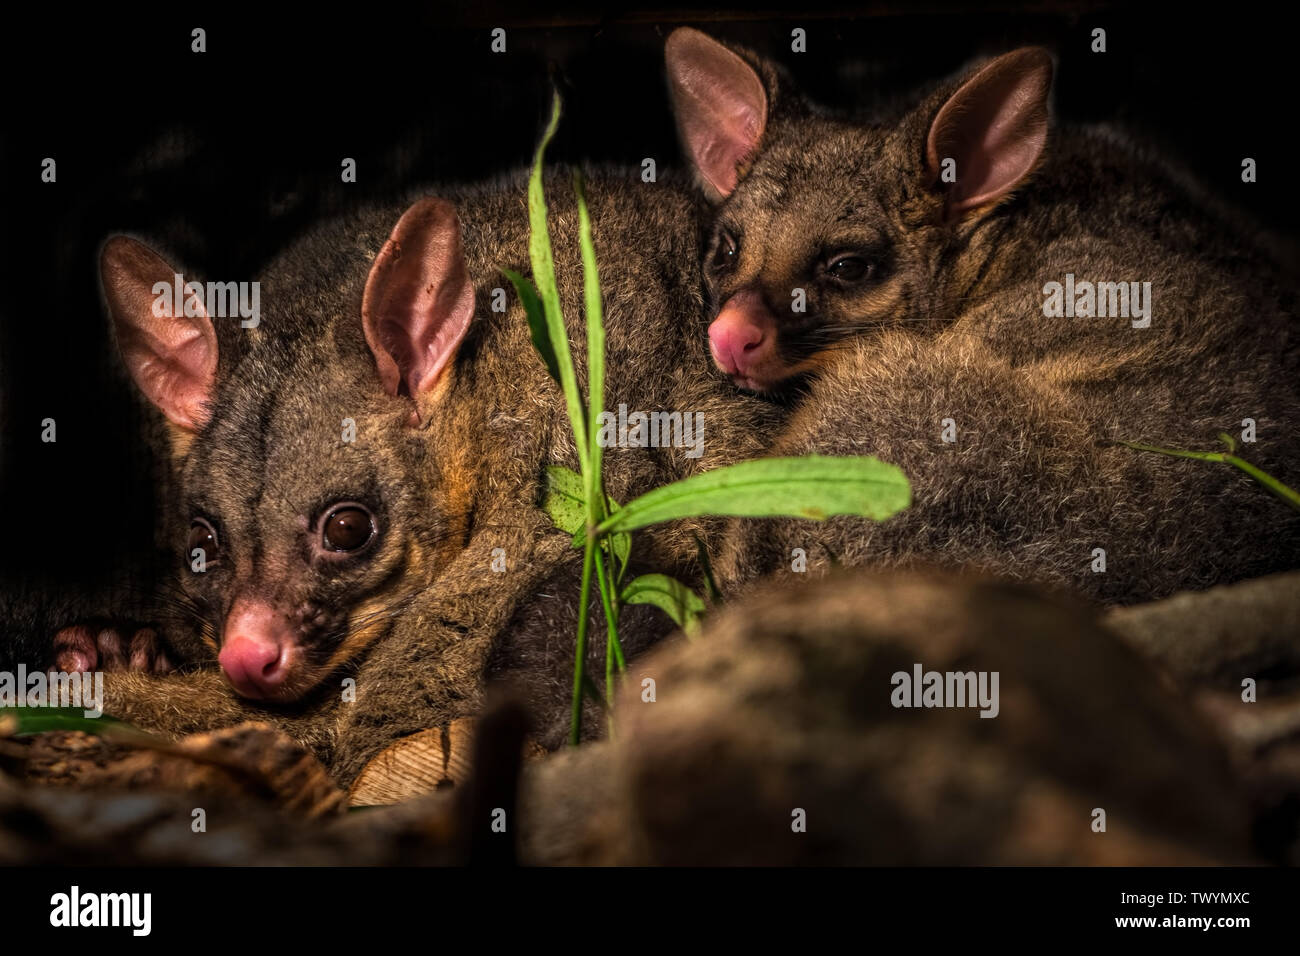 A mother and baby brush tailed possum sitting cuddled up together on a woodpile in New Zealand. Stock Photo